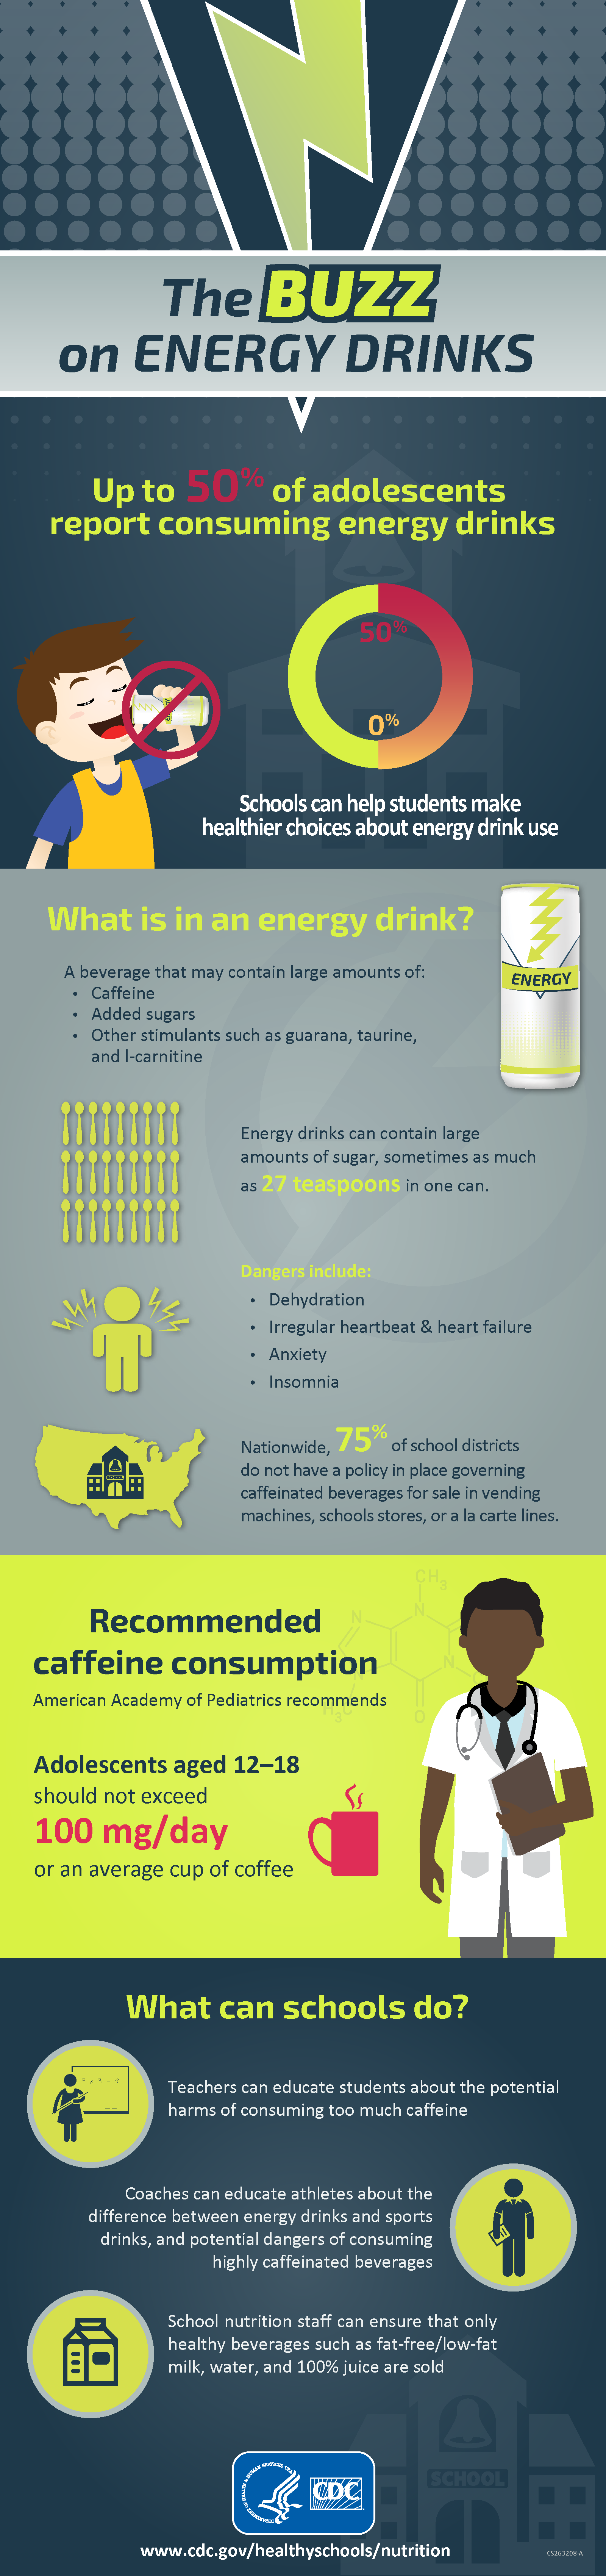 https://www.cdc.gov/healthyschools/nutrition/images/The_Buzz_on_Energy_Drinks_infographic.png